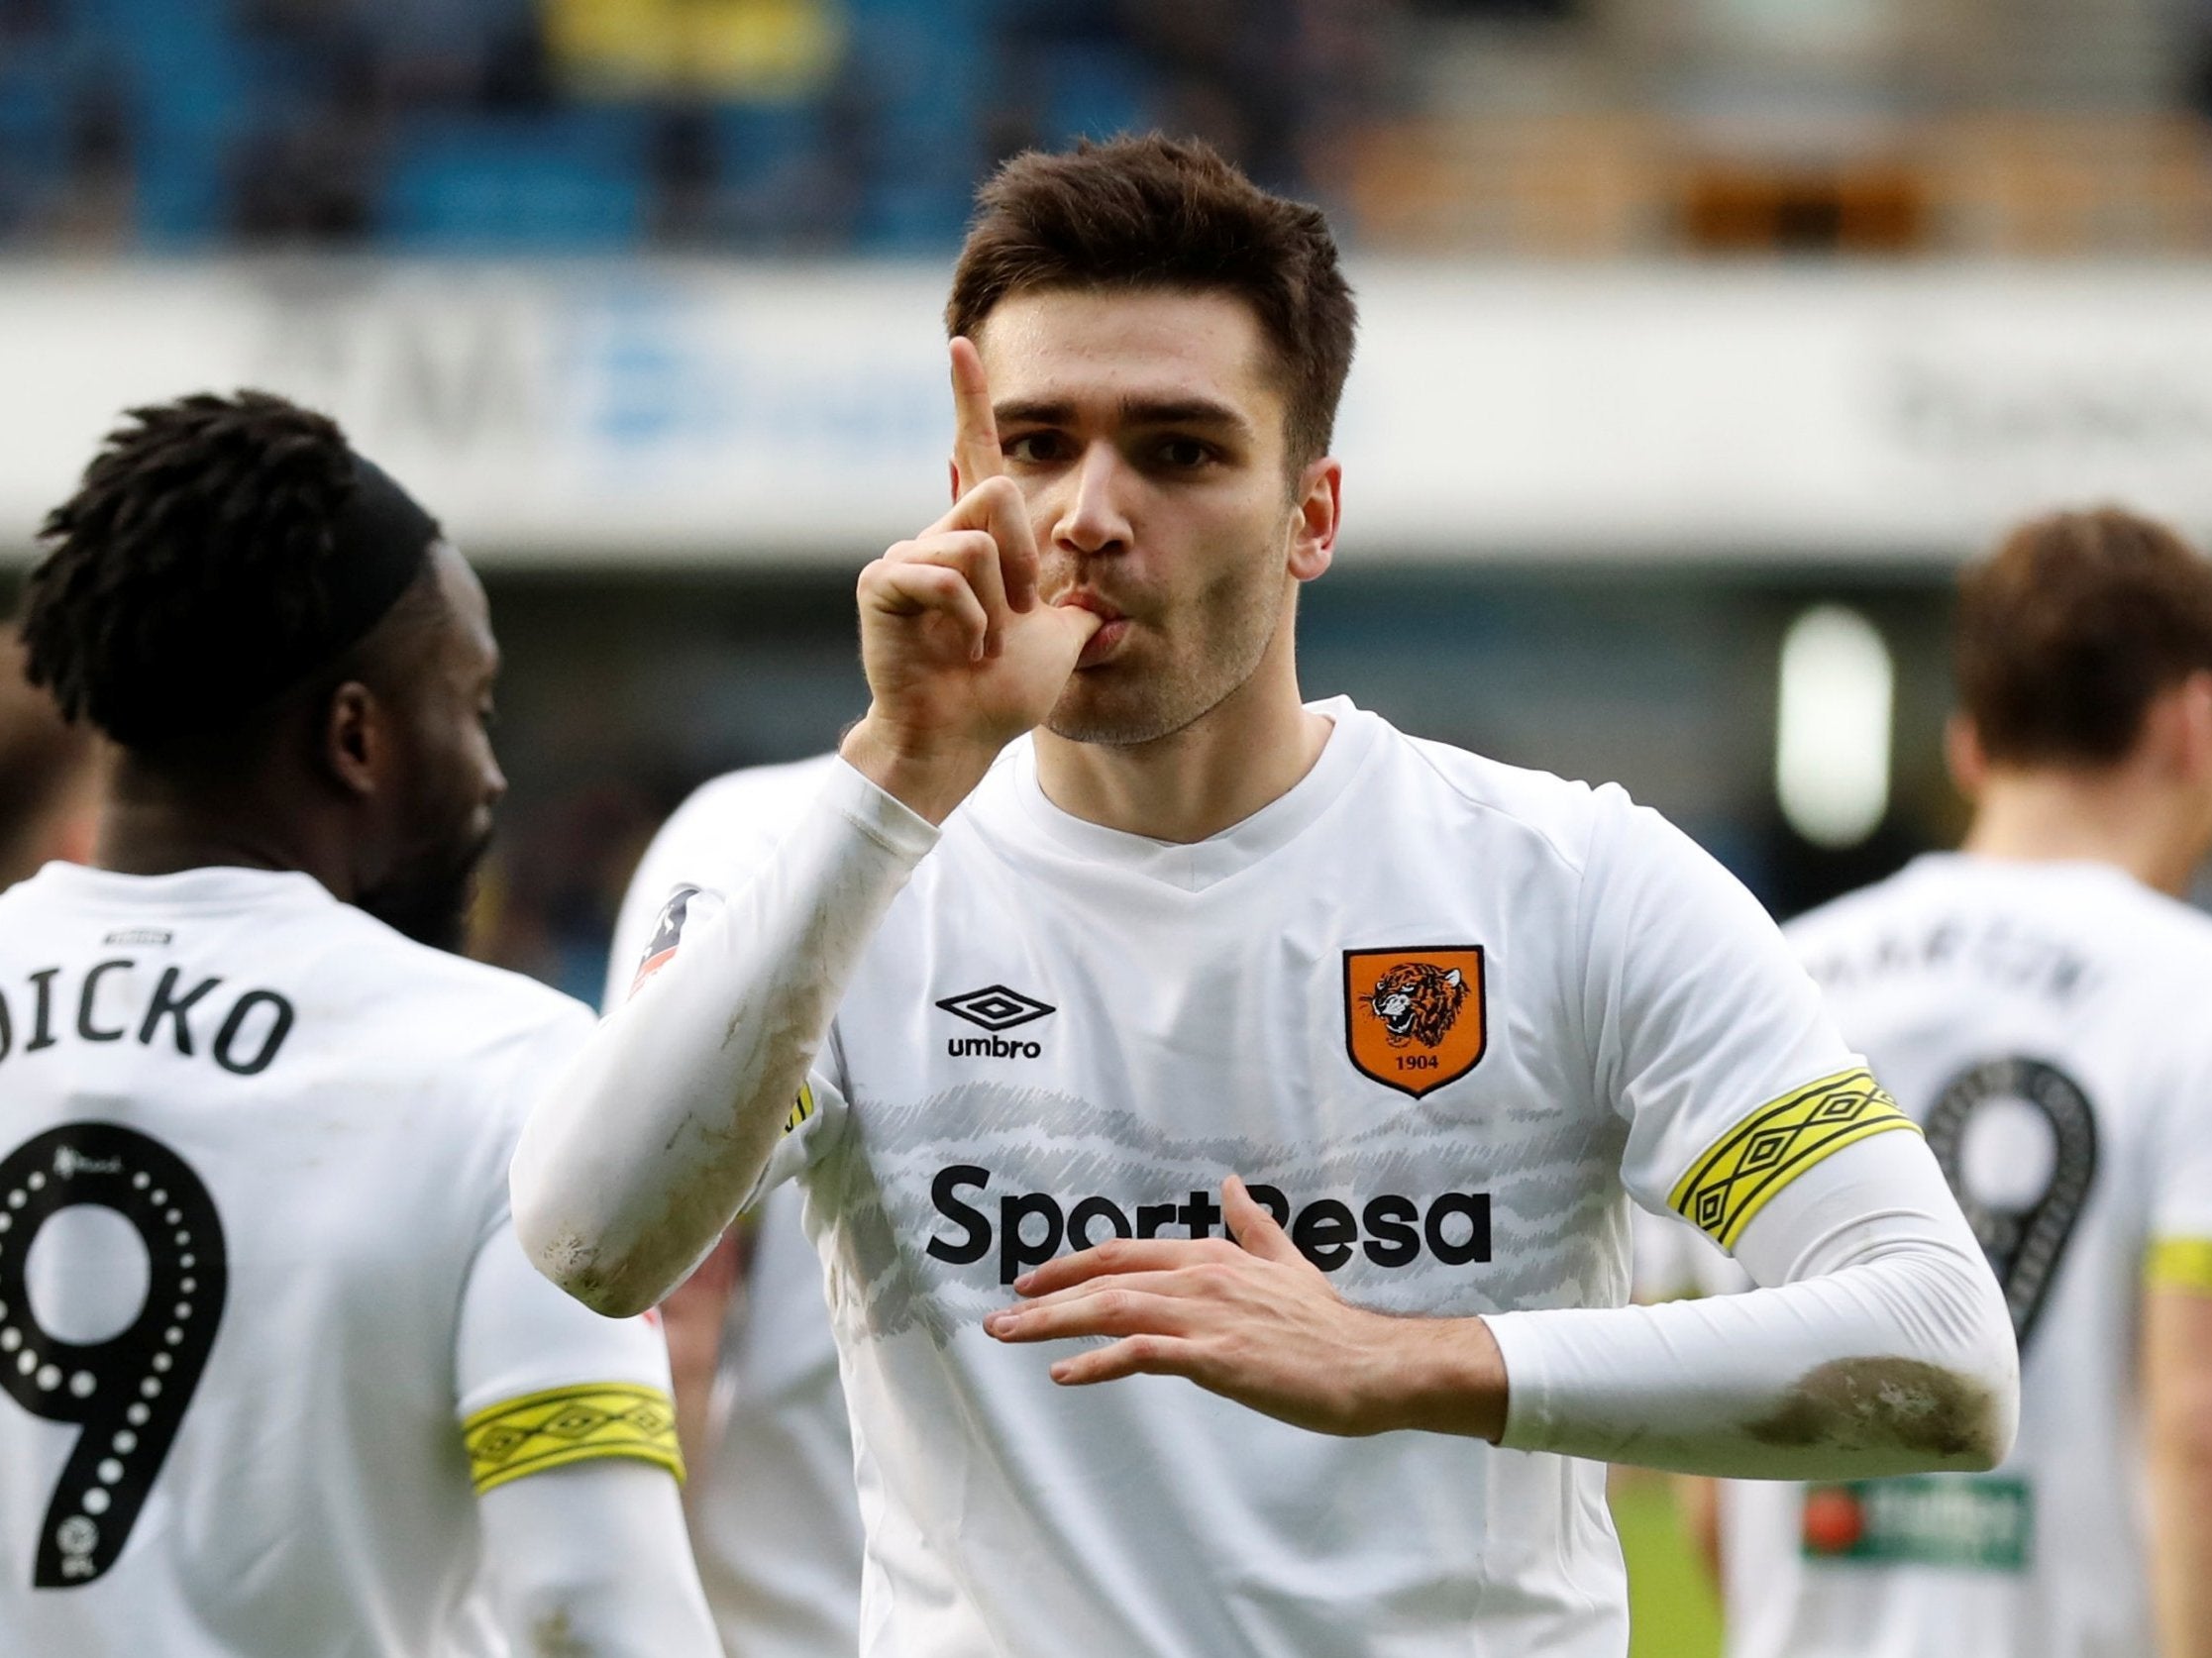 Jon Toral opened the scoring for the Tigers